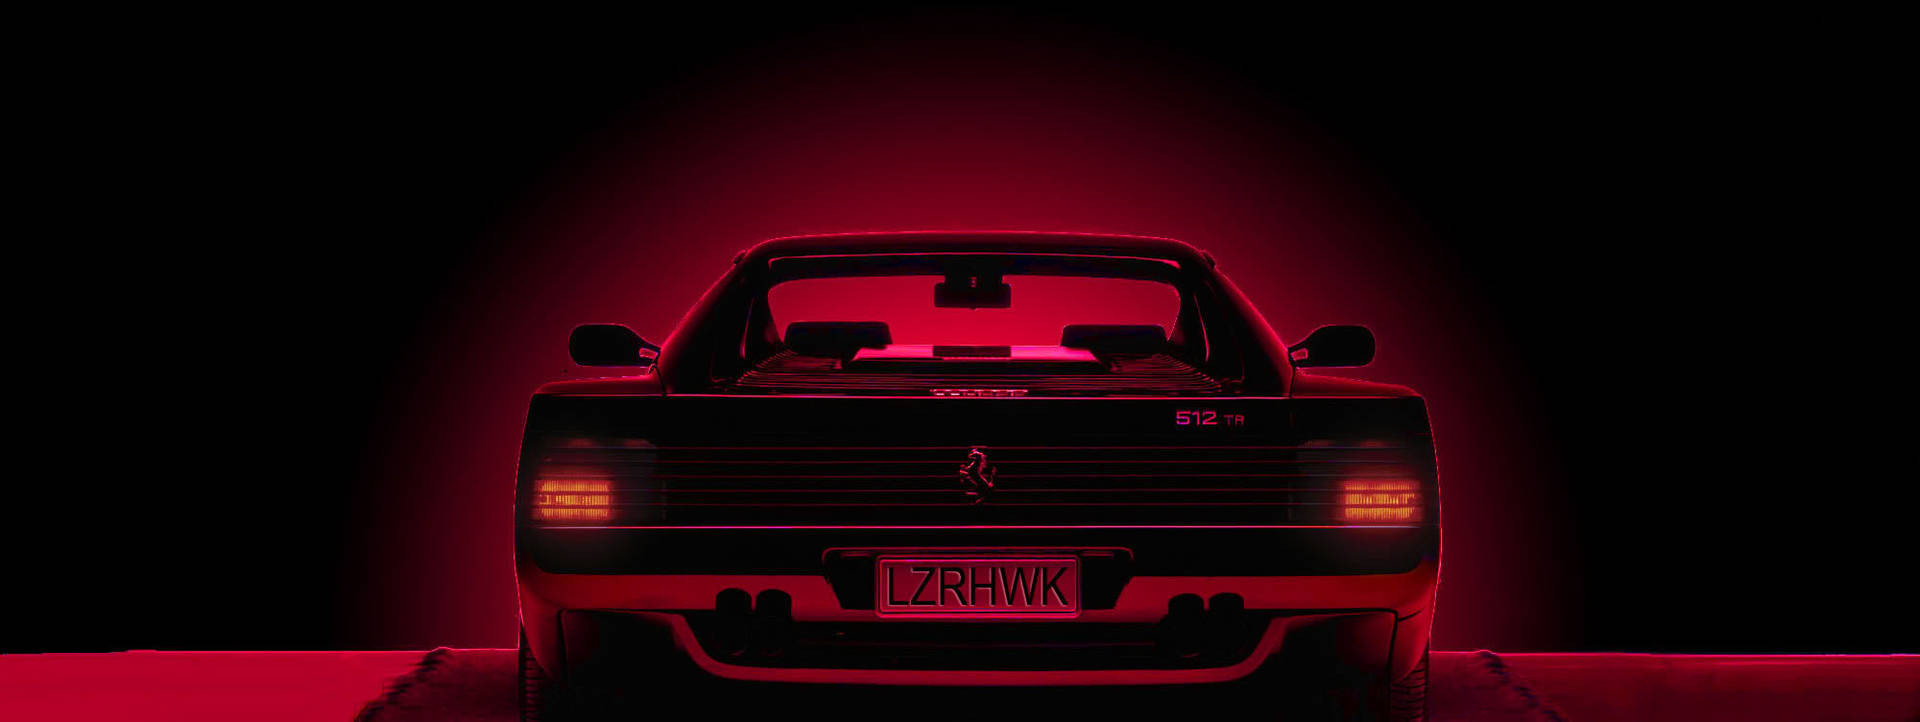 Cruise the neon highways and Byways with Lazerhawk in Redline: A Retrowave Neon Adventure Wallpaper